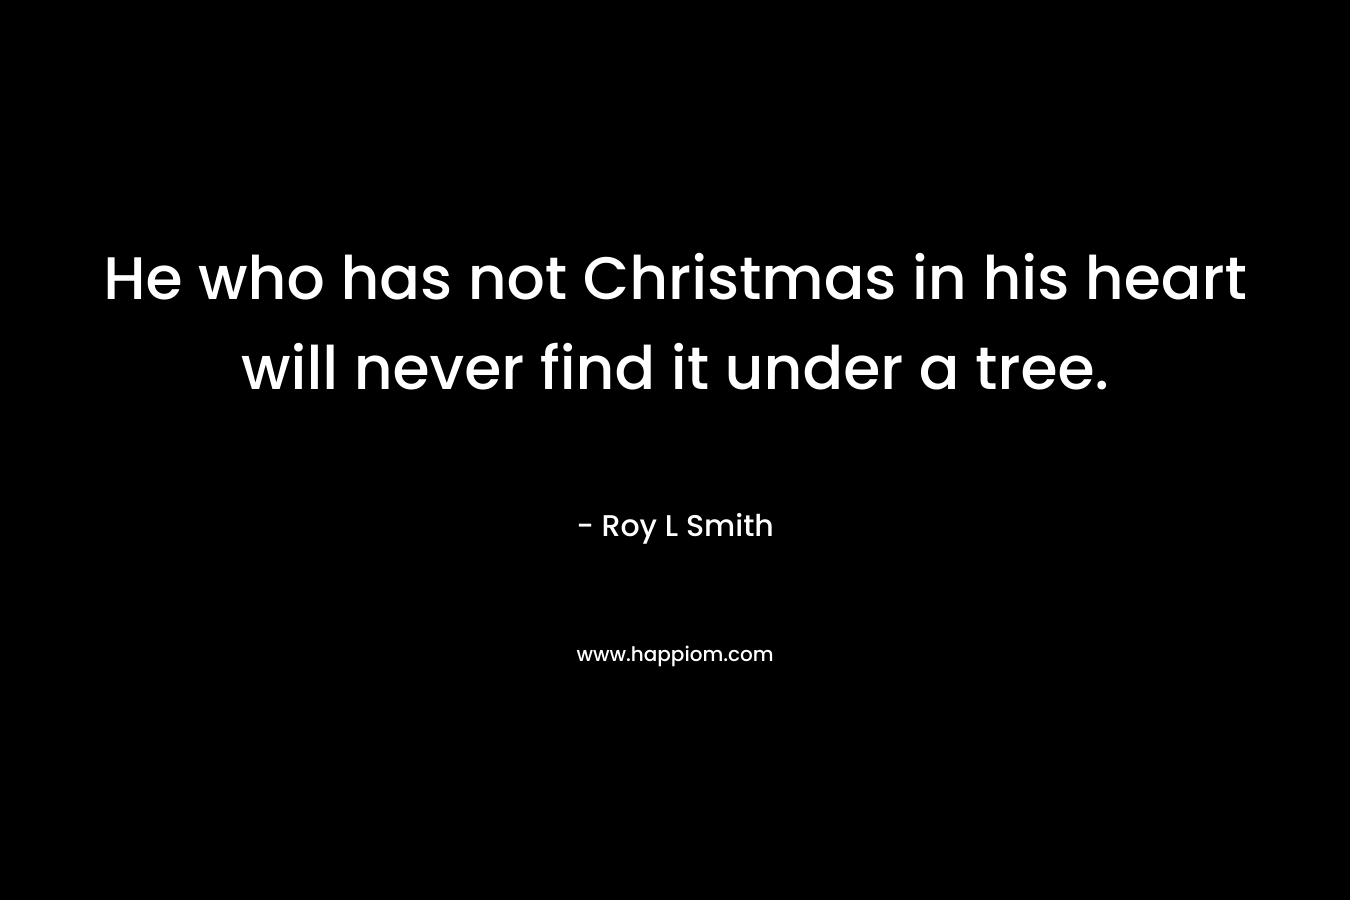 He who has not Christmas in his heart will never find it under a tree. – Roy L Smith